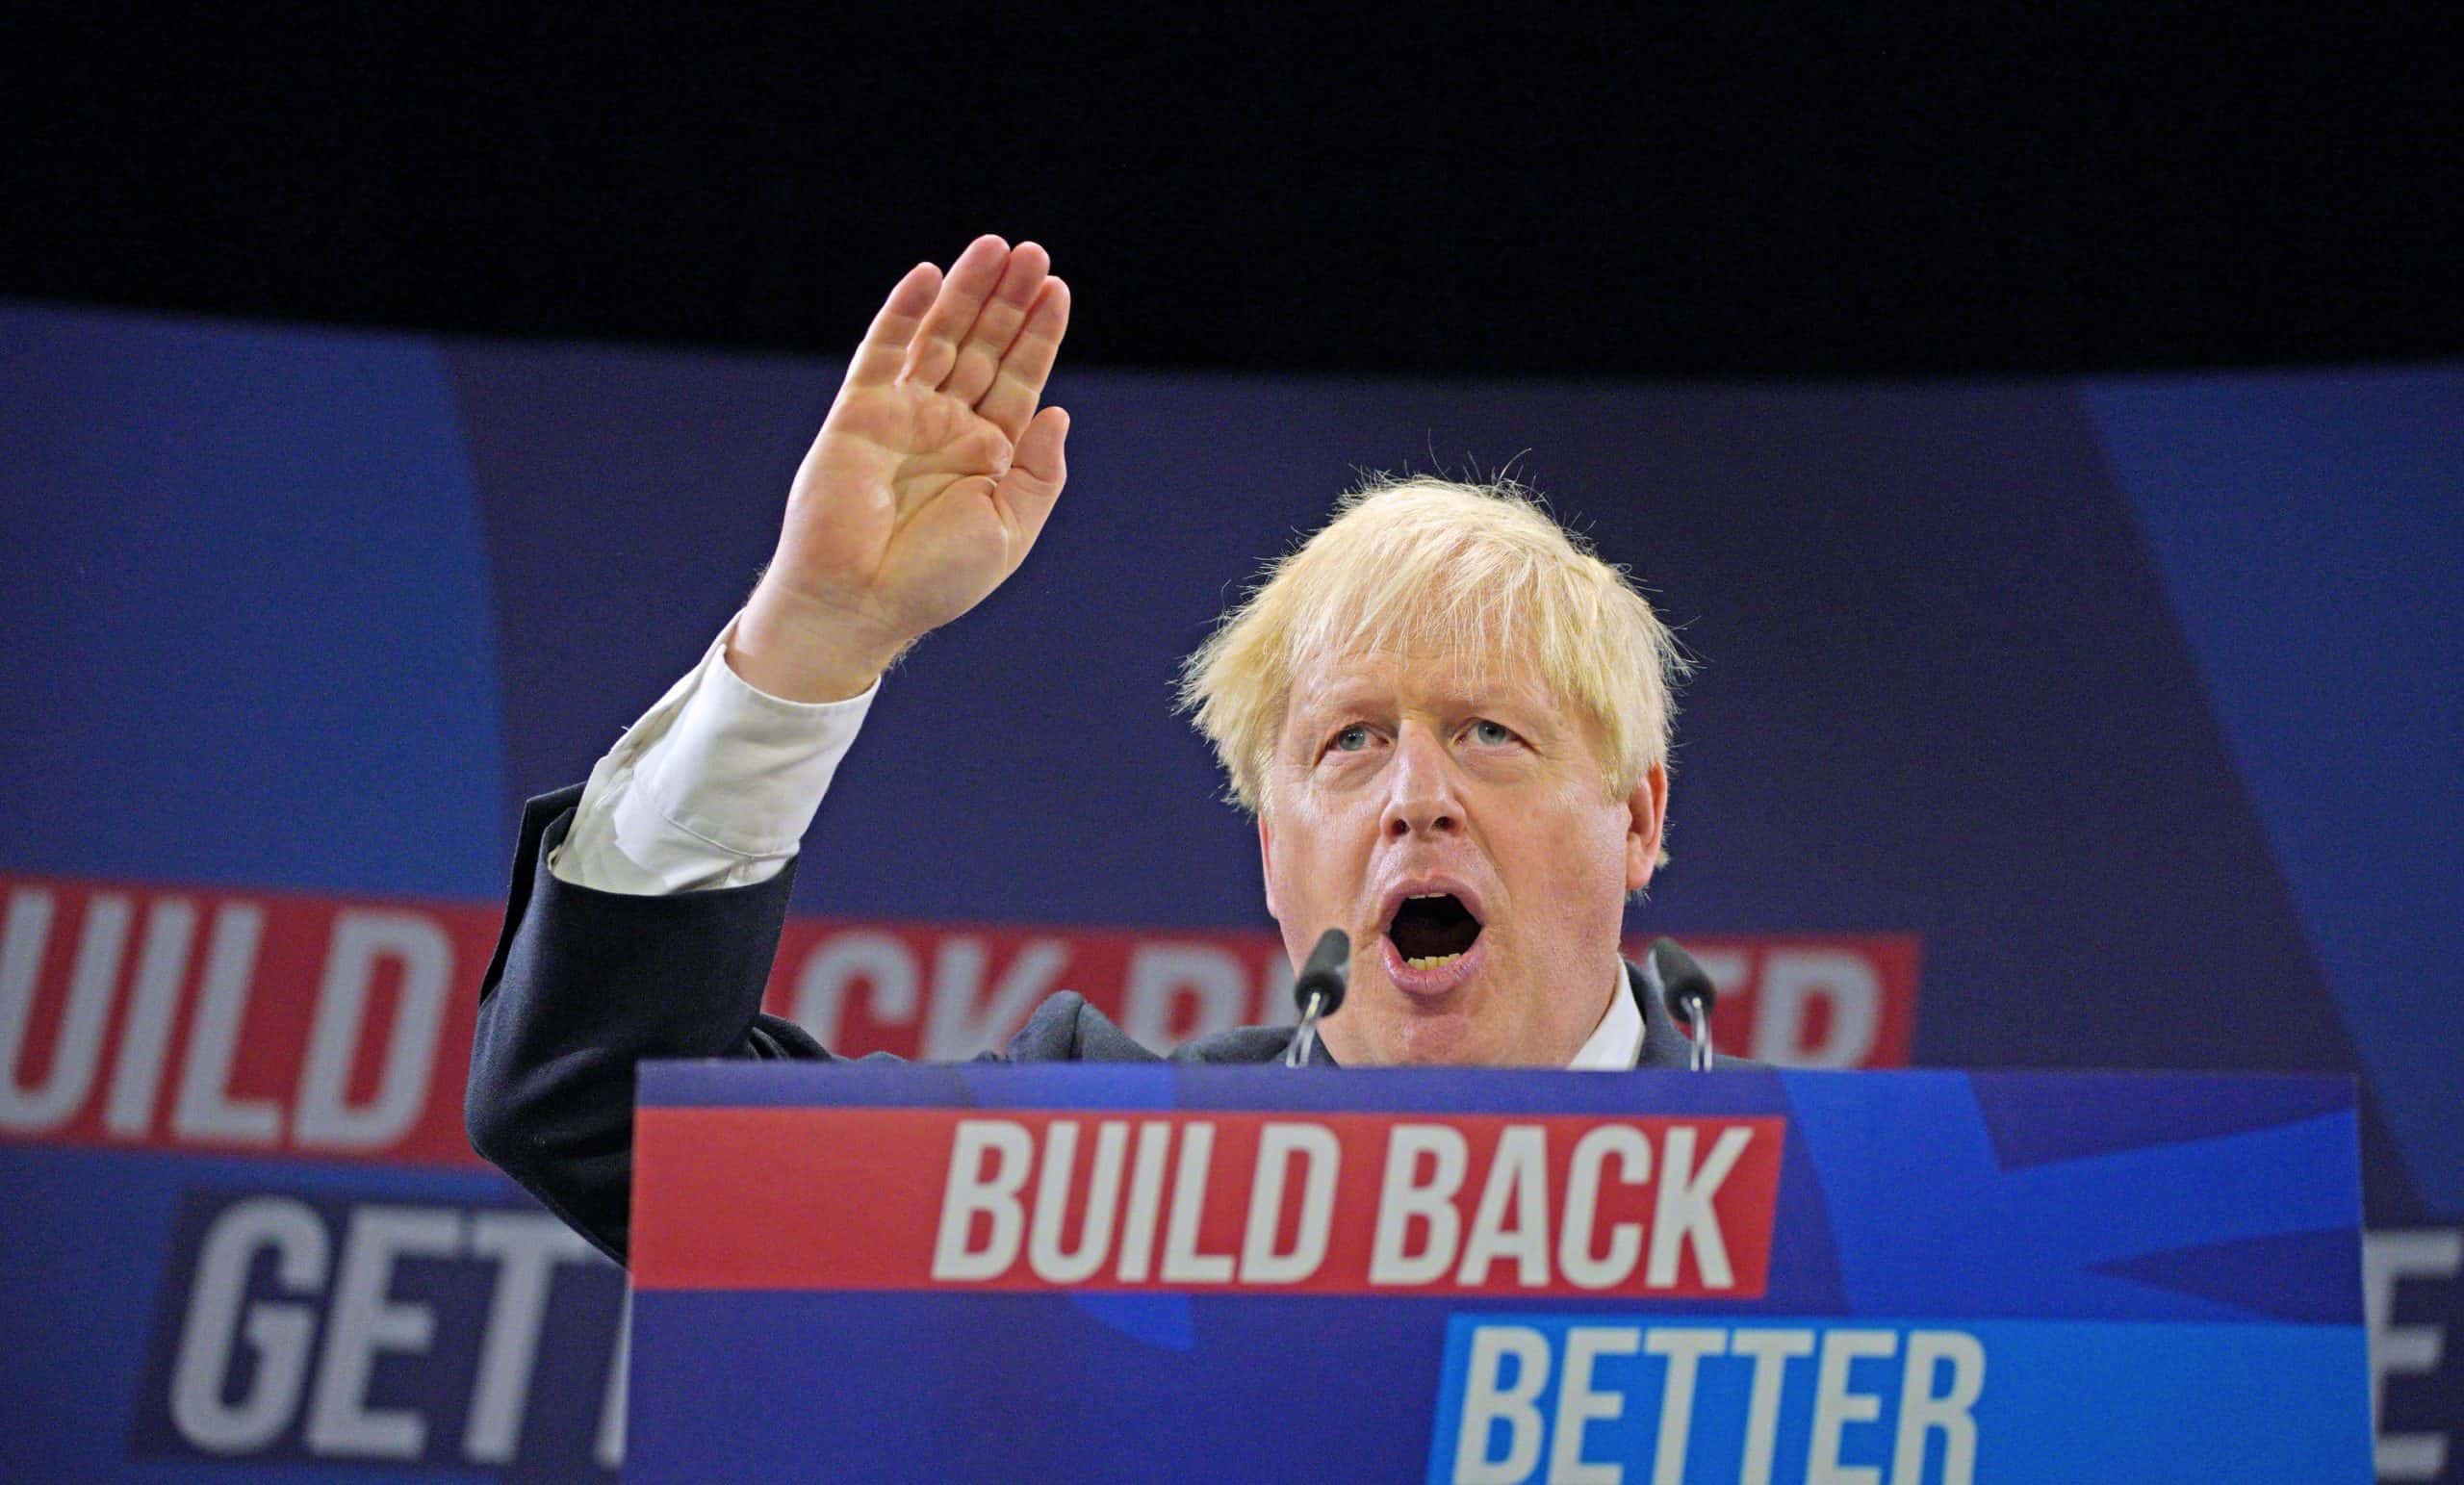 Big on bluster, short on substance: Boris gives rambling conference speech